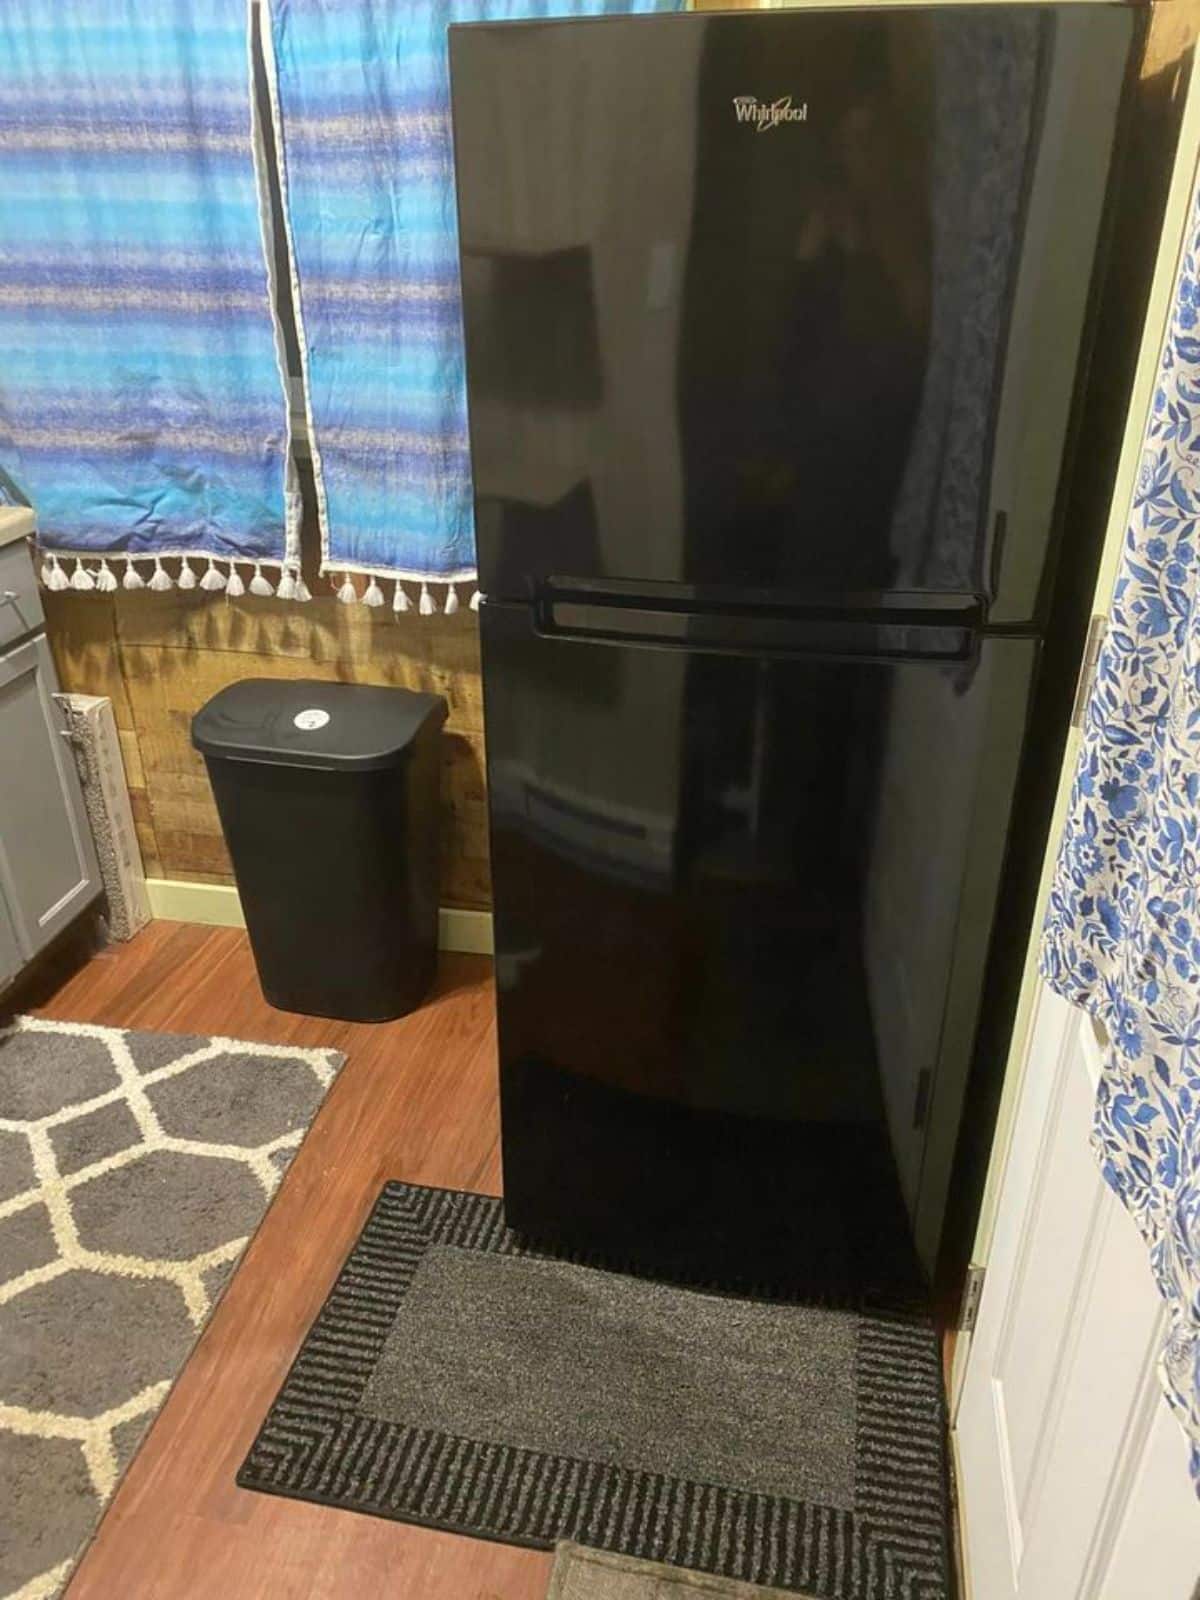 double door refrigerator in the kitchen area included in the deal